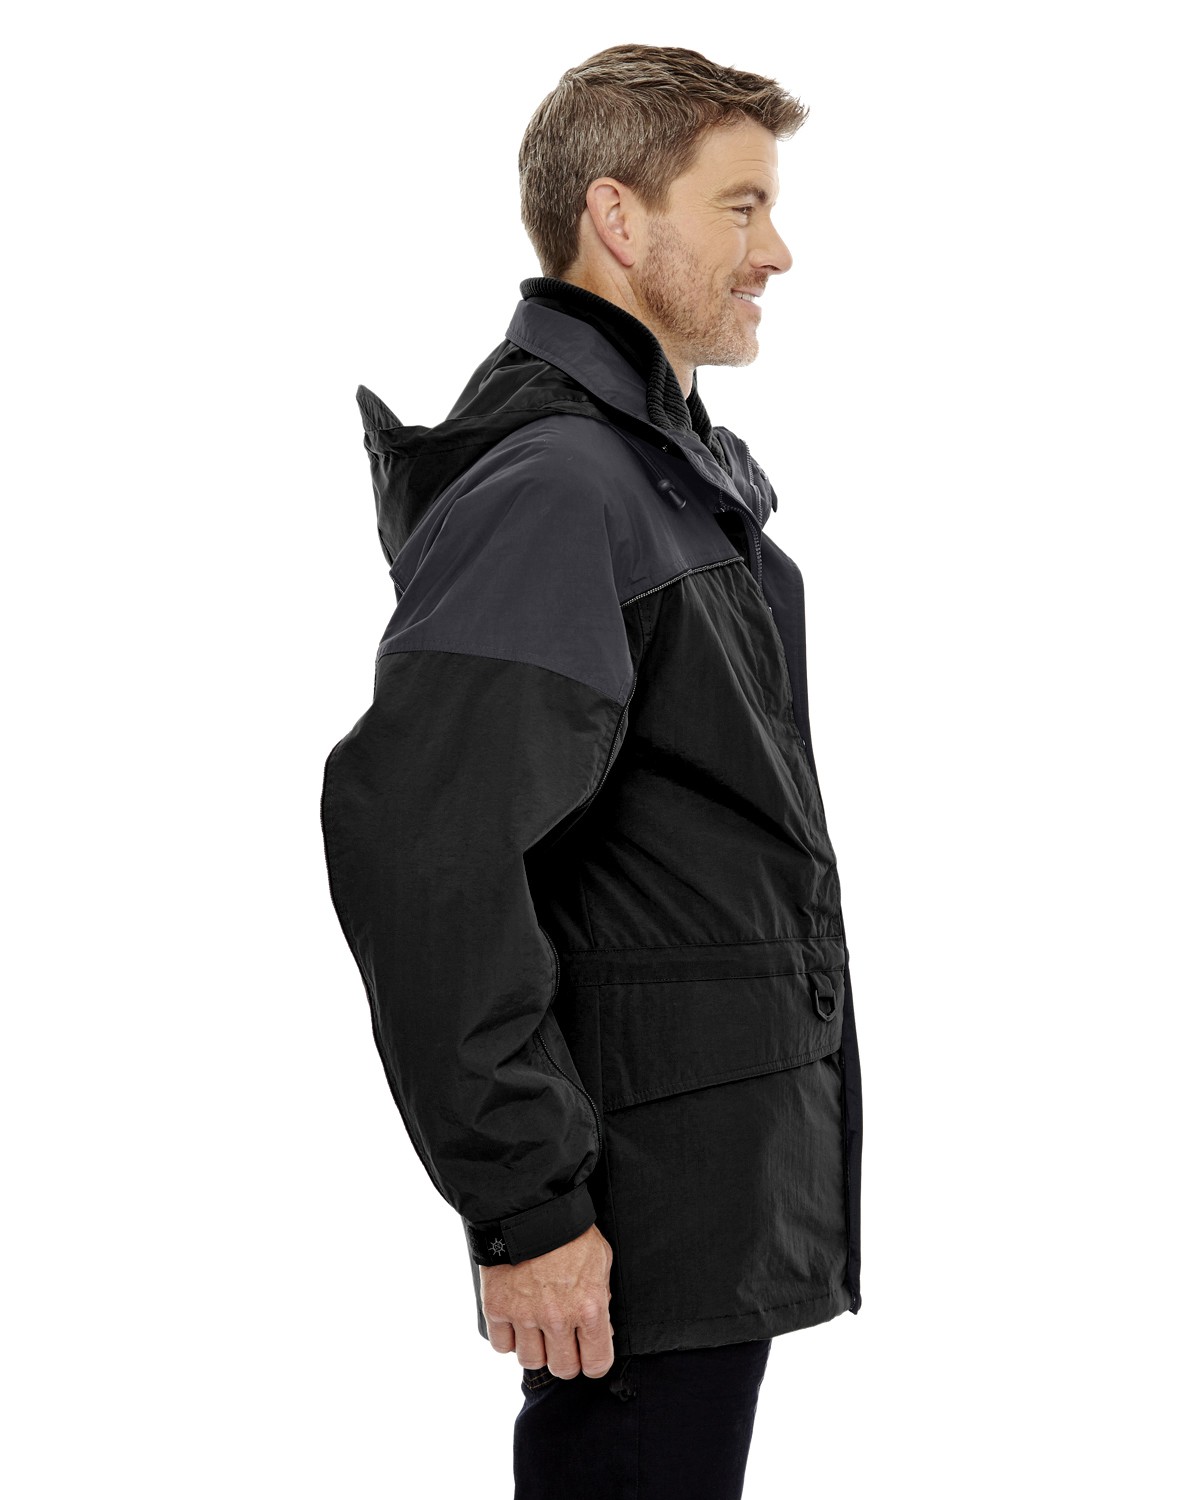 North End 88006 Adult 3-In-1 Two-Tone Parka